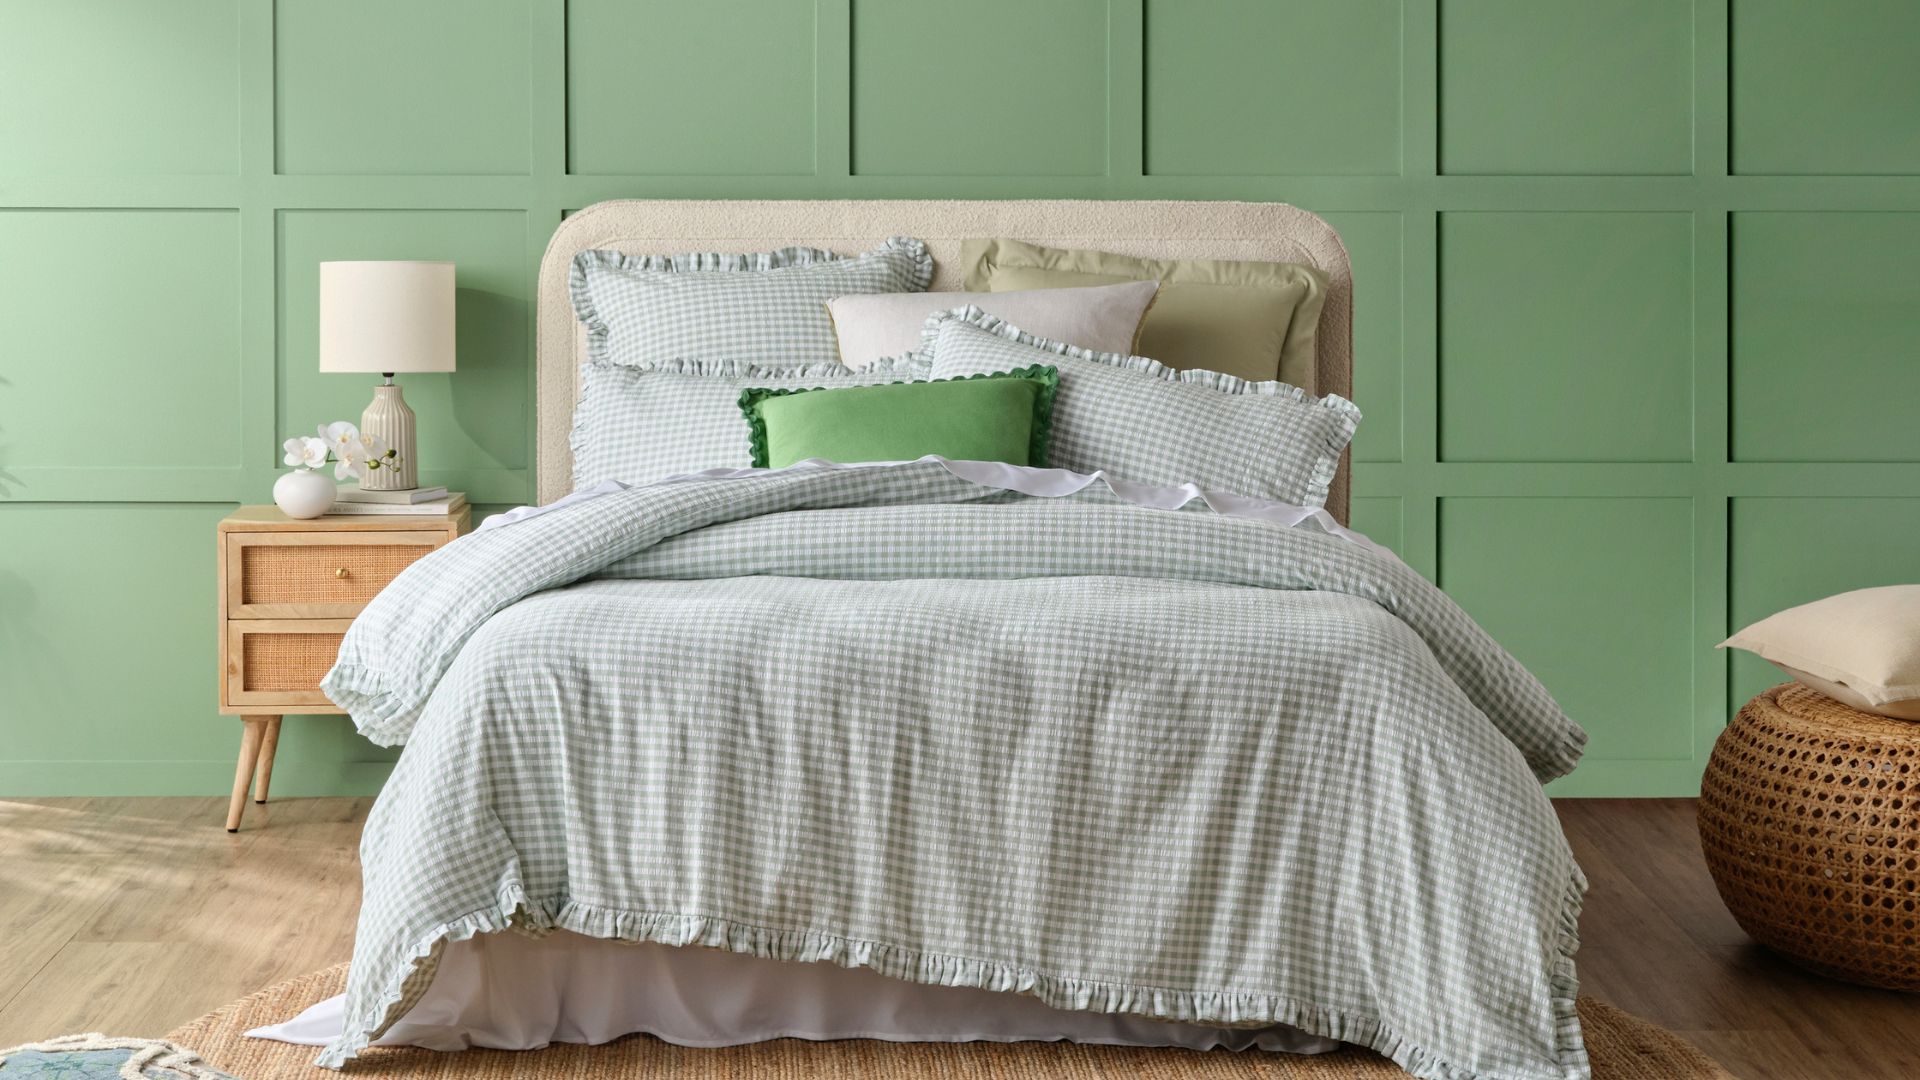 2024 Bed Linen Style Trends - The Earthy, The Tactile & The Unexpected